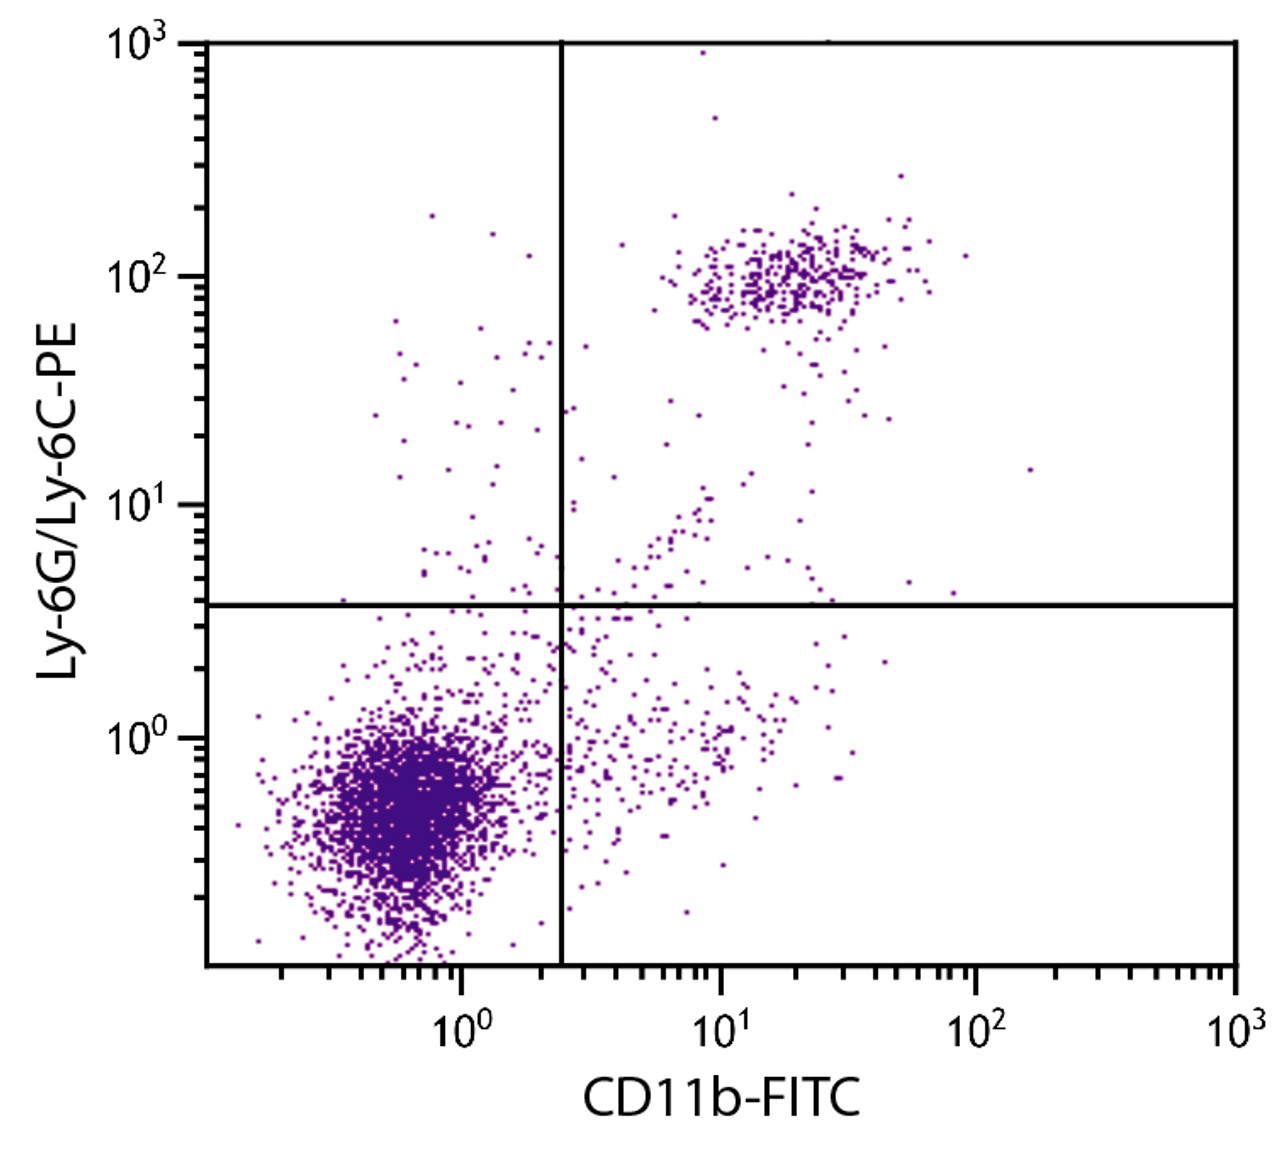 BALB/c mouse splenocytes were stained with Rat Anti-Mouse CD11b-FITC (Cat. No. 98-643) and Rat Anti-Mouse Ly-6G/Ly-6C-PE .